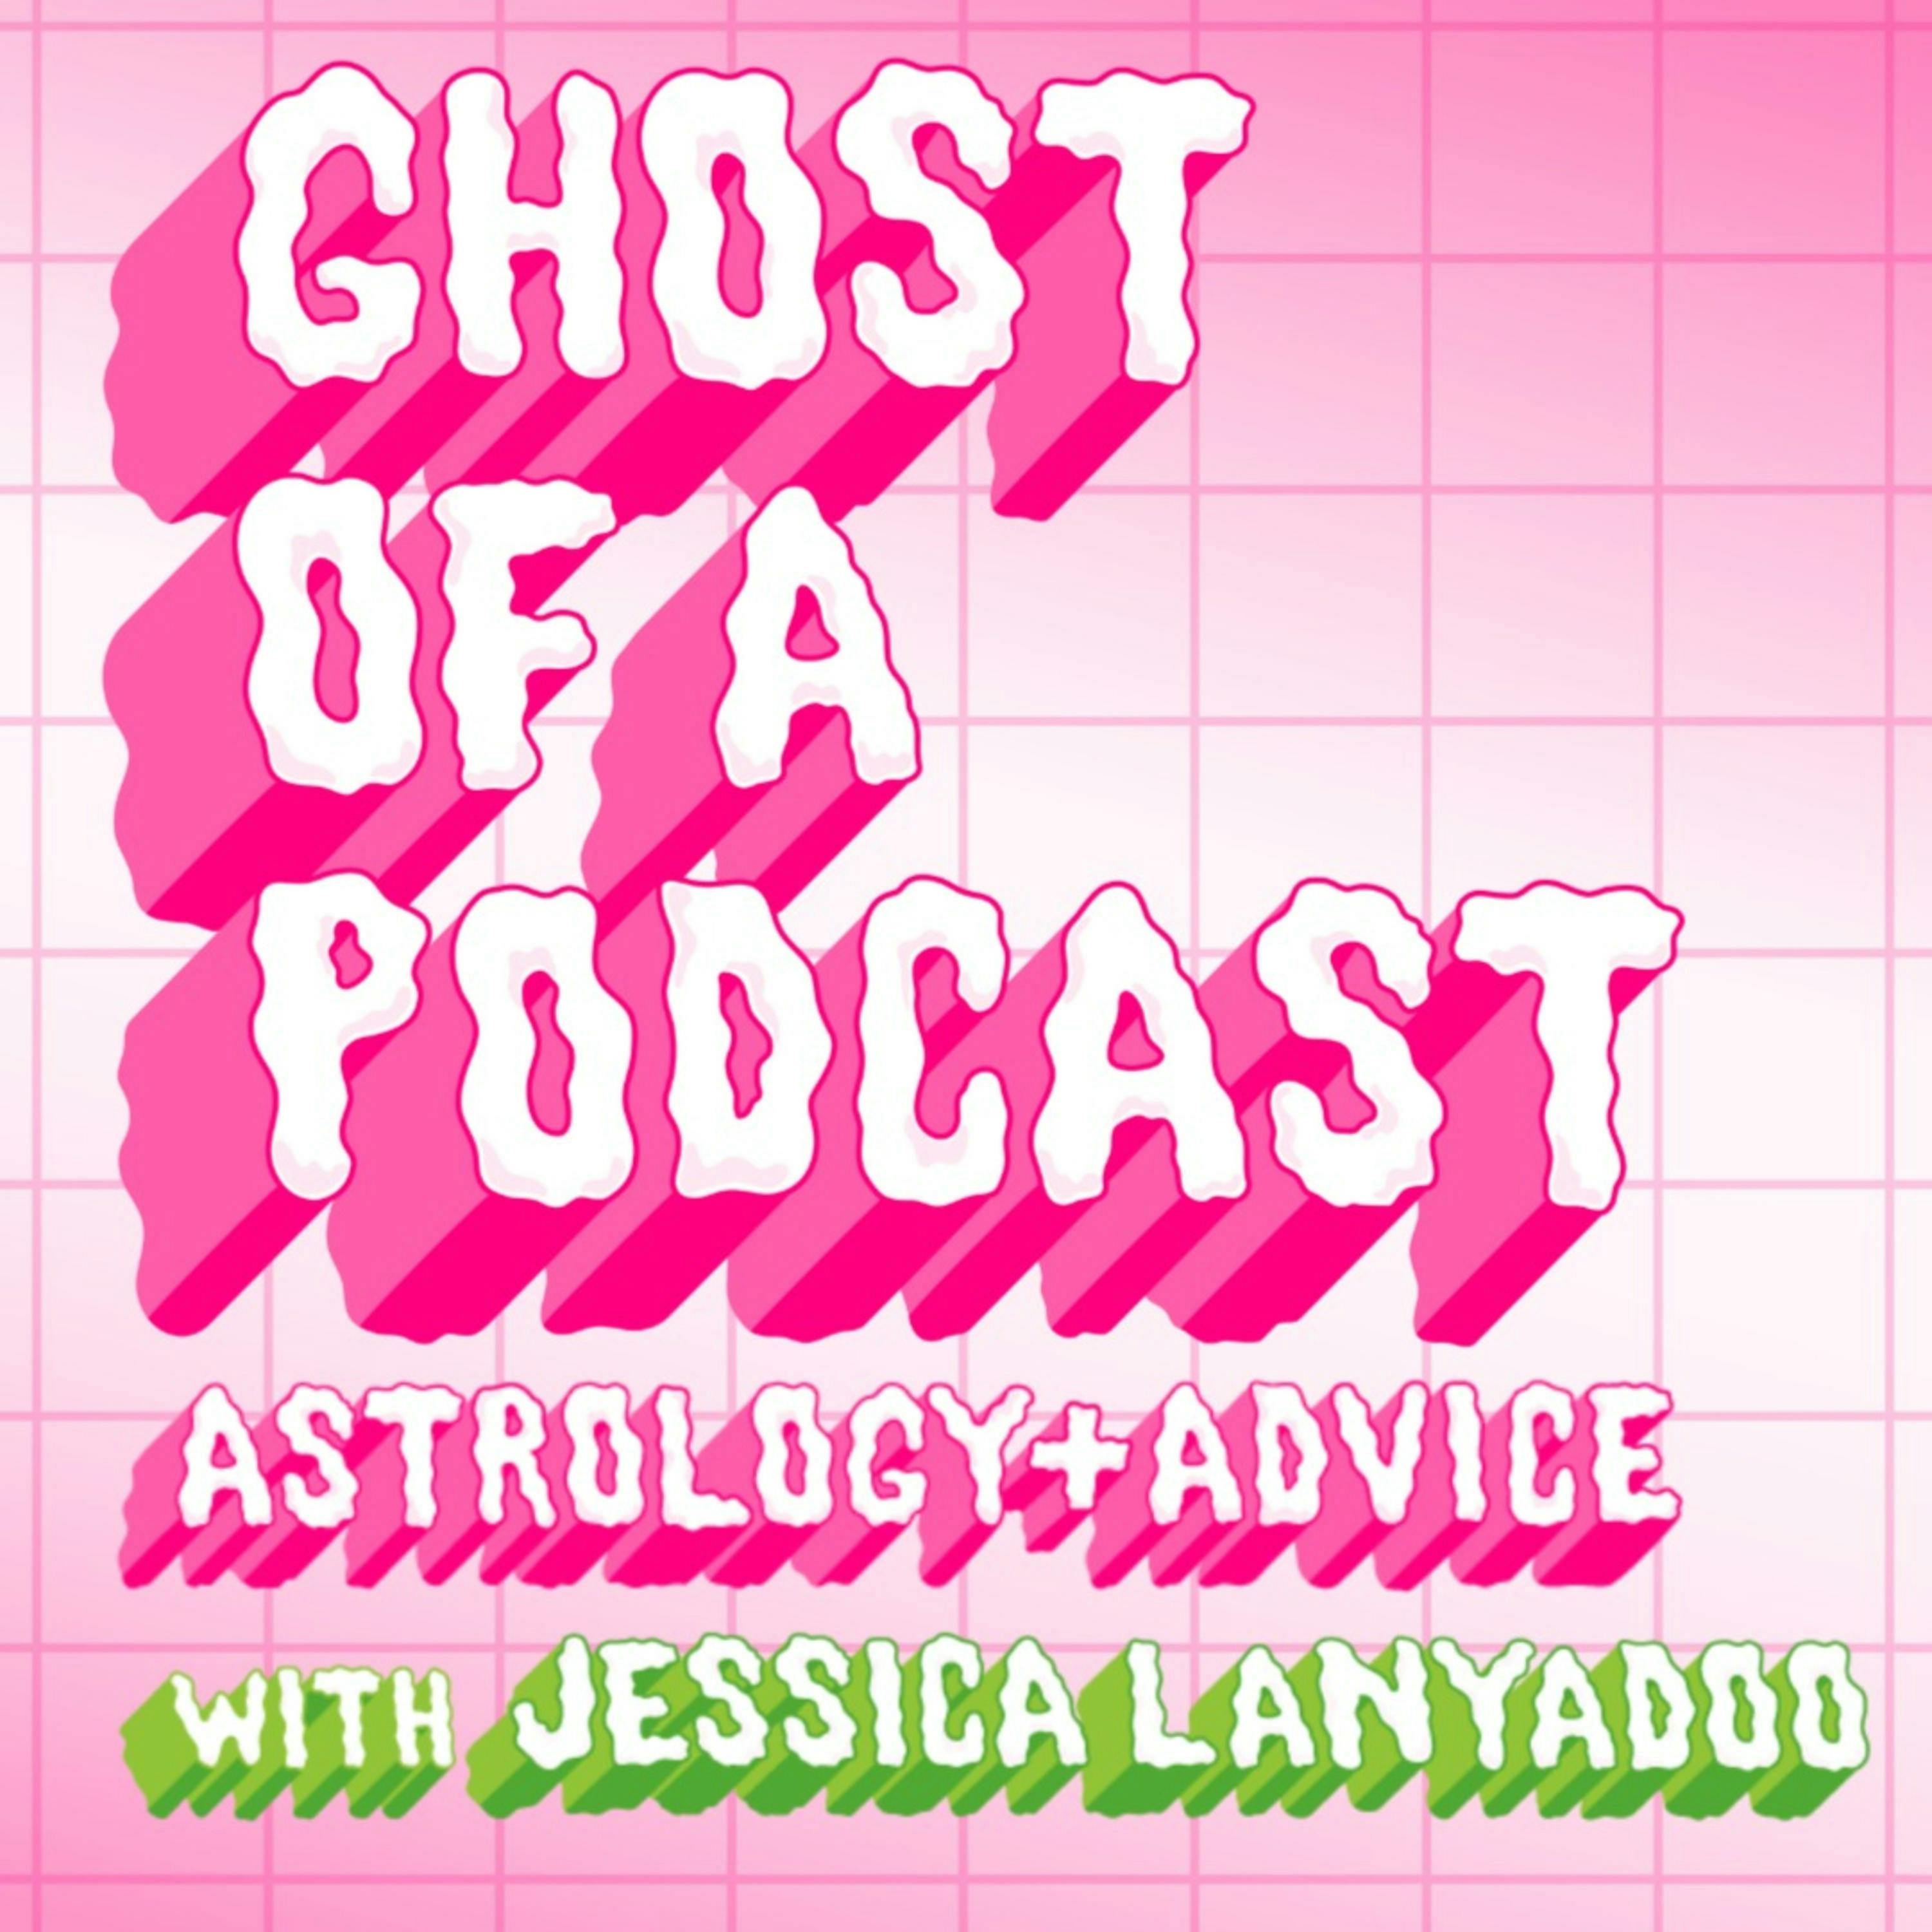 398: Horoscope - It’s All Trines + A Sextile